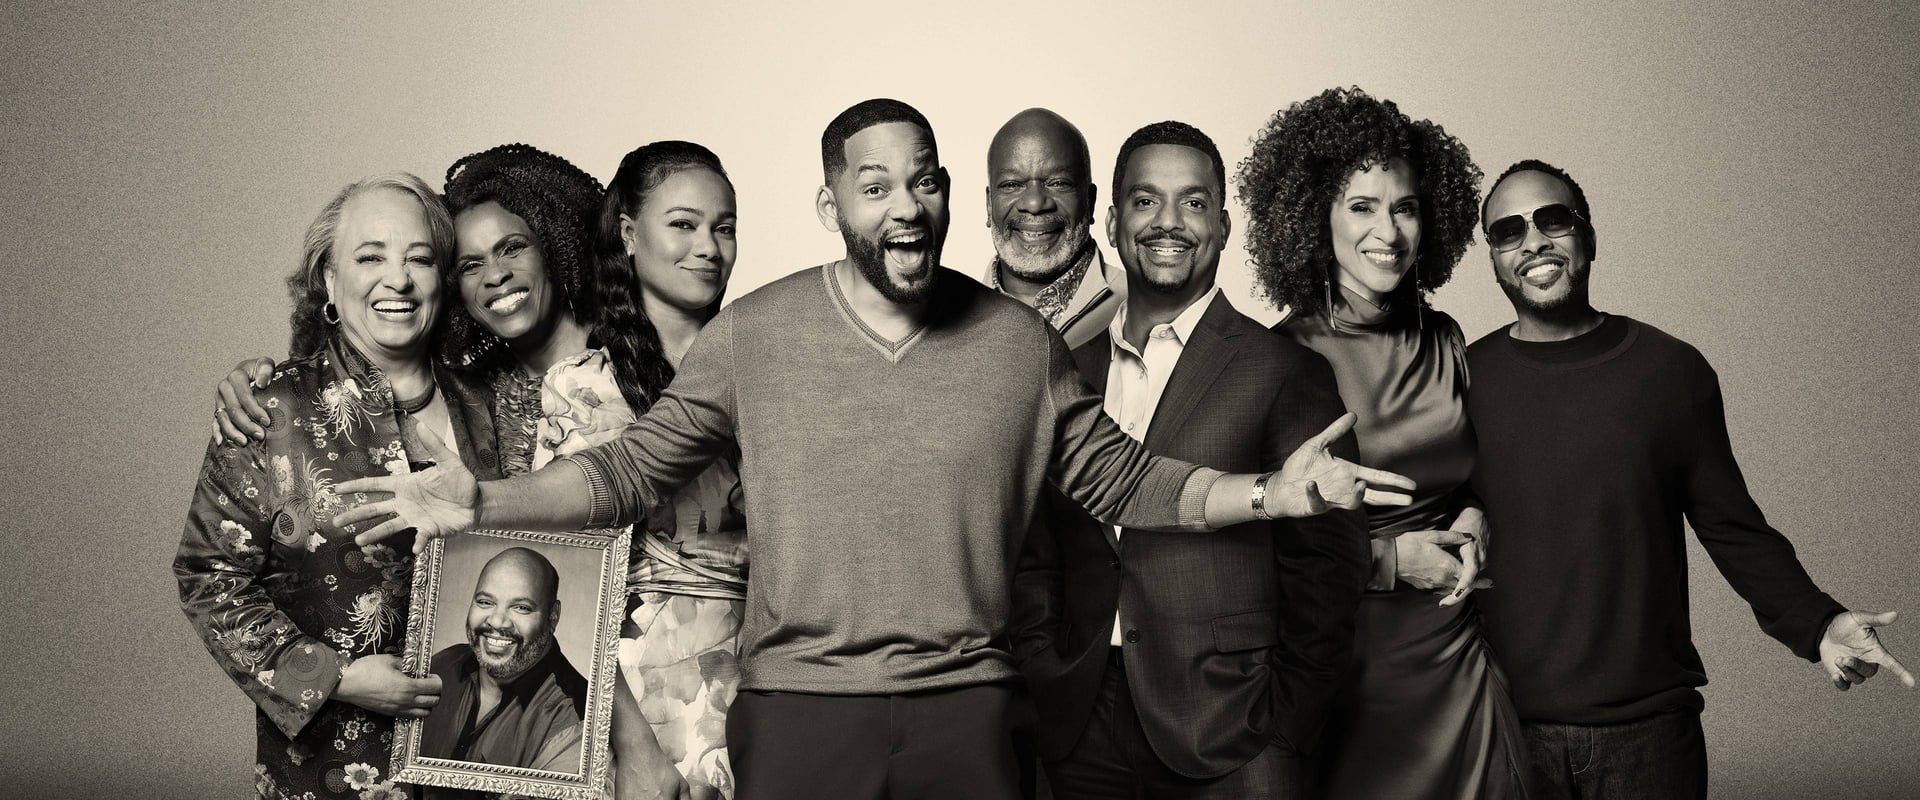 The Fresh Prince of Bel-Air Reunion Special